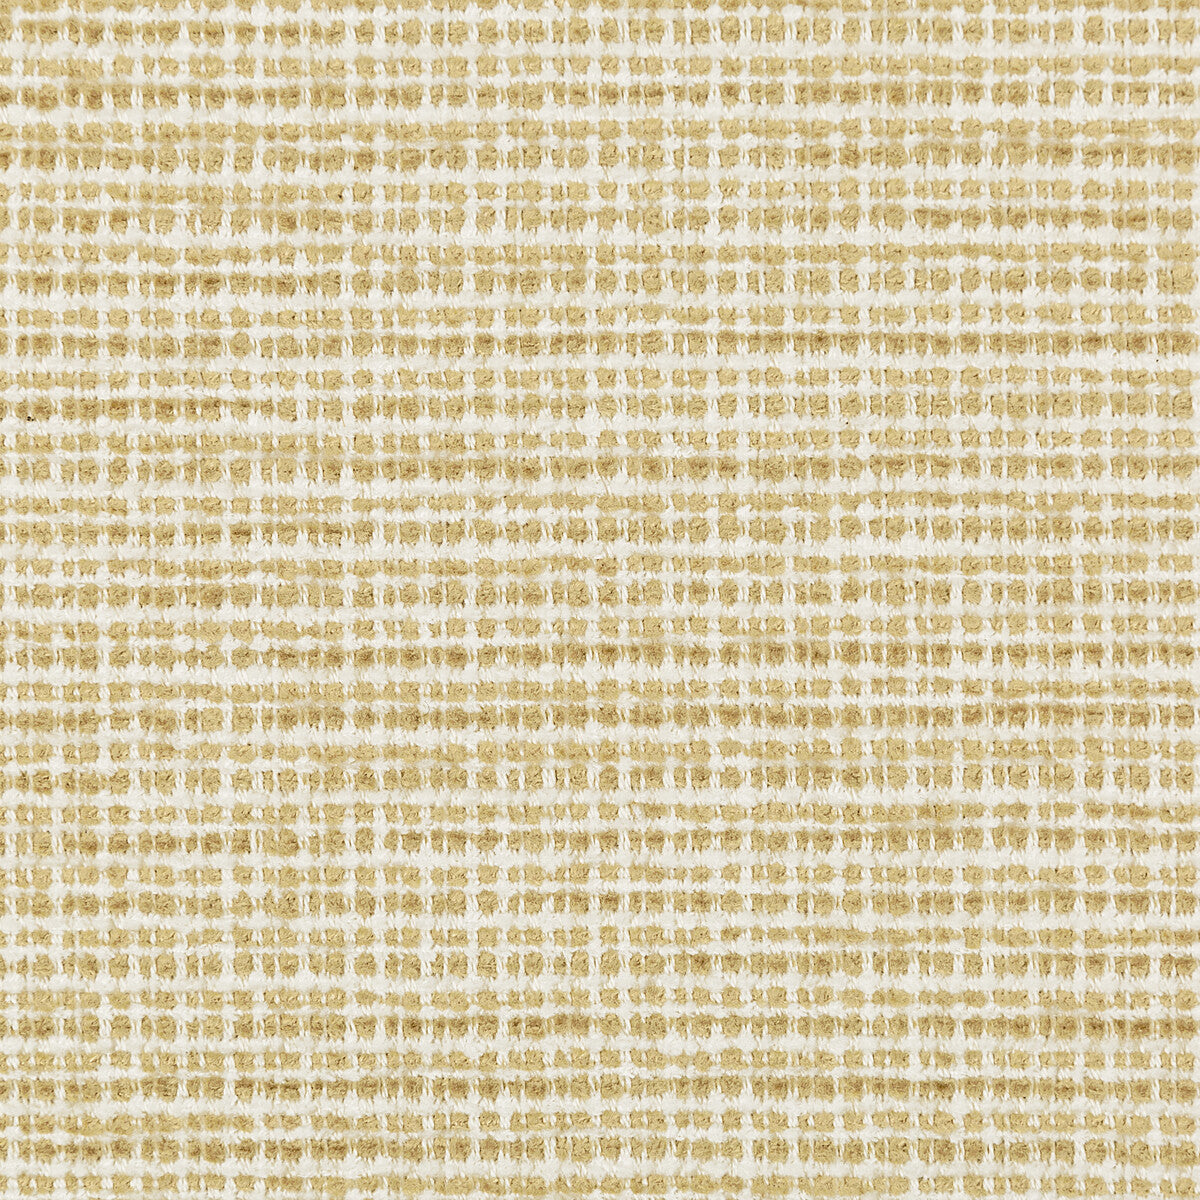 Freney Texture fabric in honey color - pattern 8019149.14.0 - by Brunschwig &amp; Fils in the Chambery Textures II collection